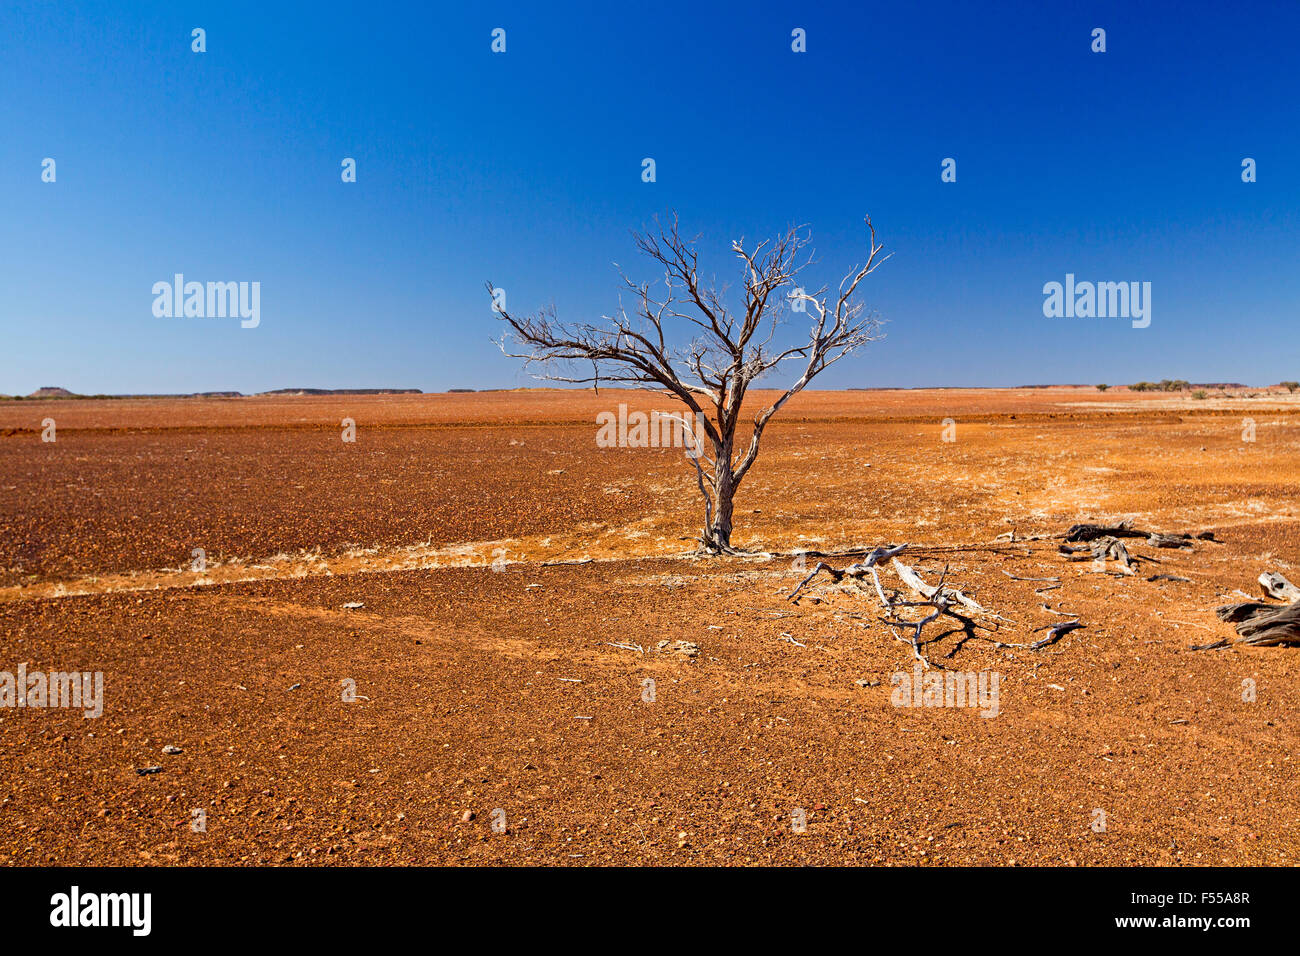 Australian outback landscape in drought, solitary dead tree on barren red treeless plains stretching to far horizon & blue sky Stock Photo